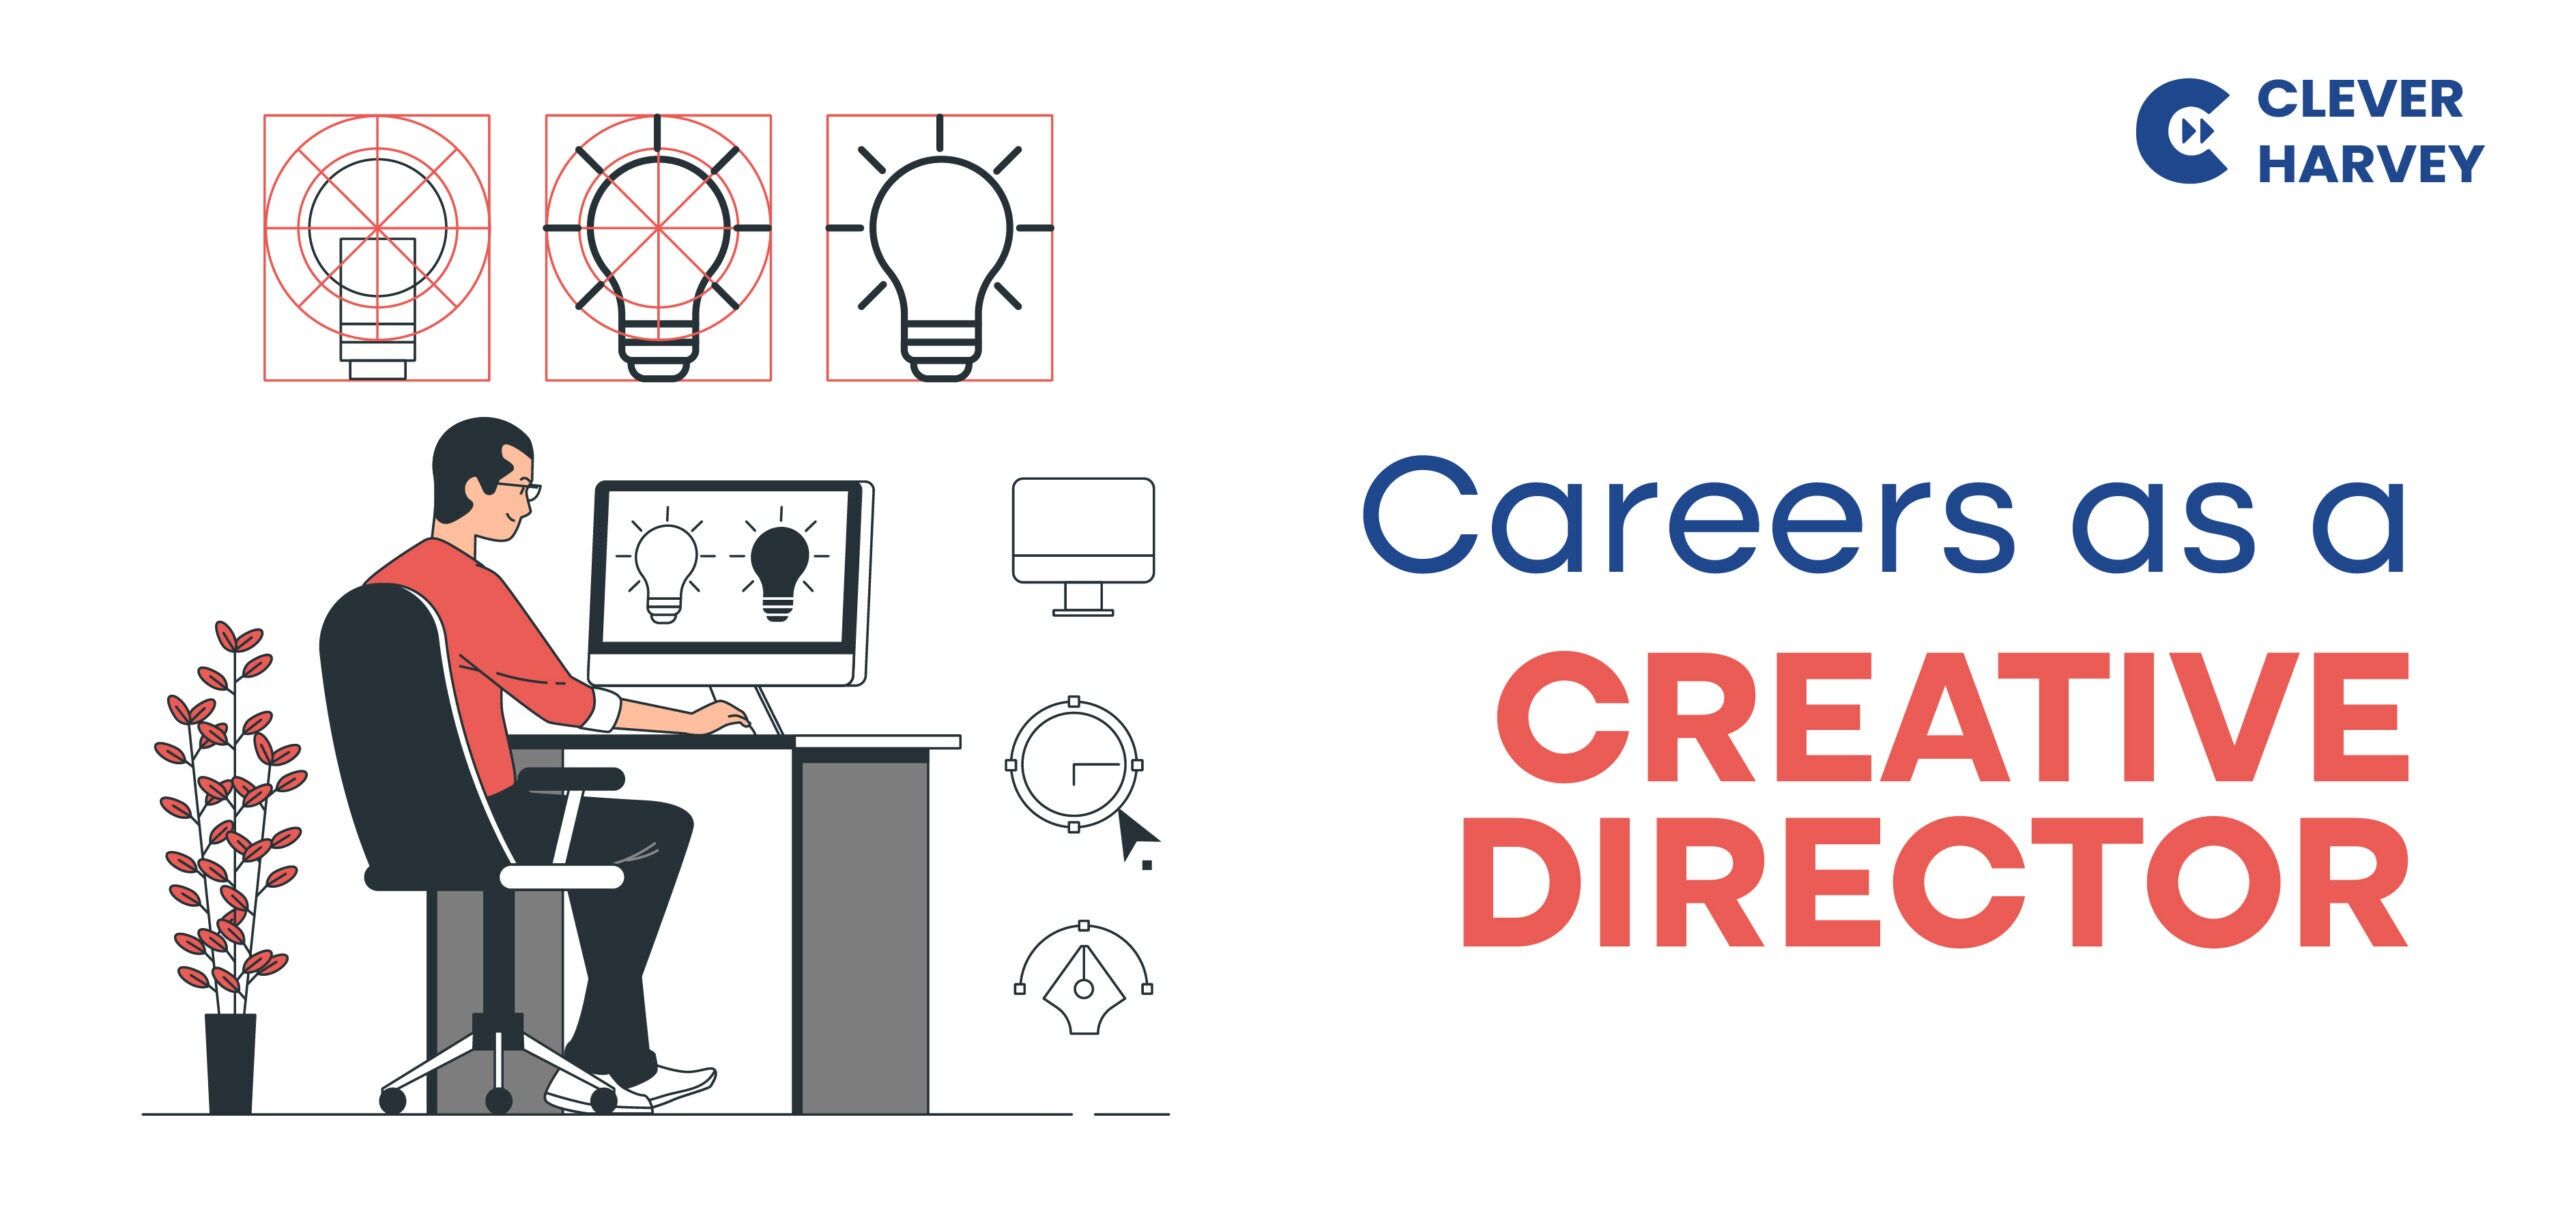 What Does a Creative Director Do?